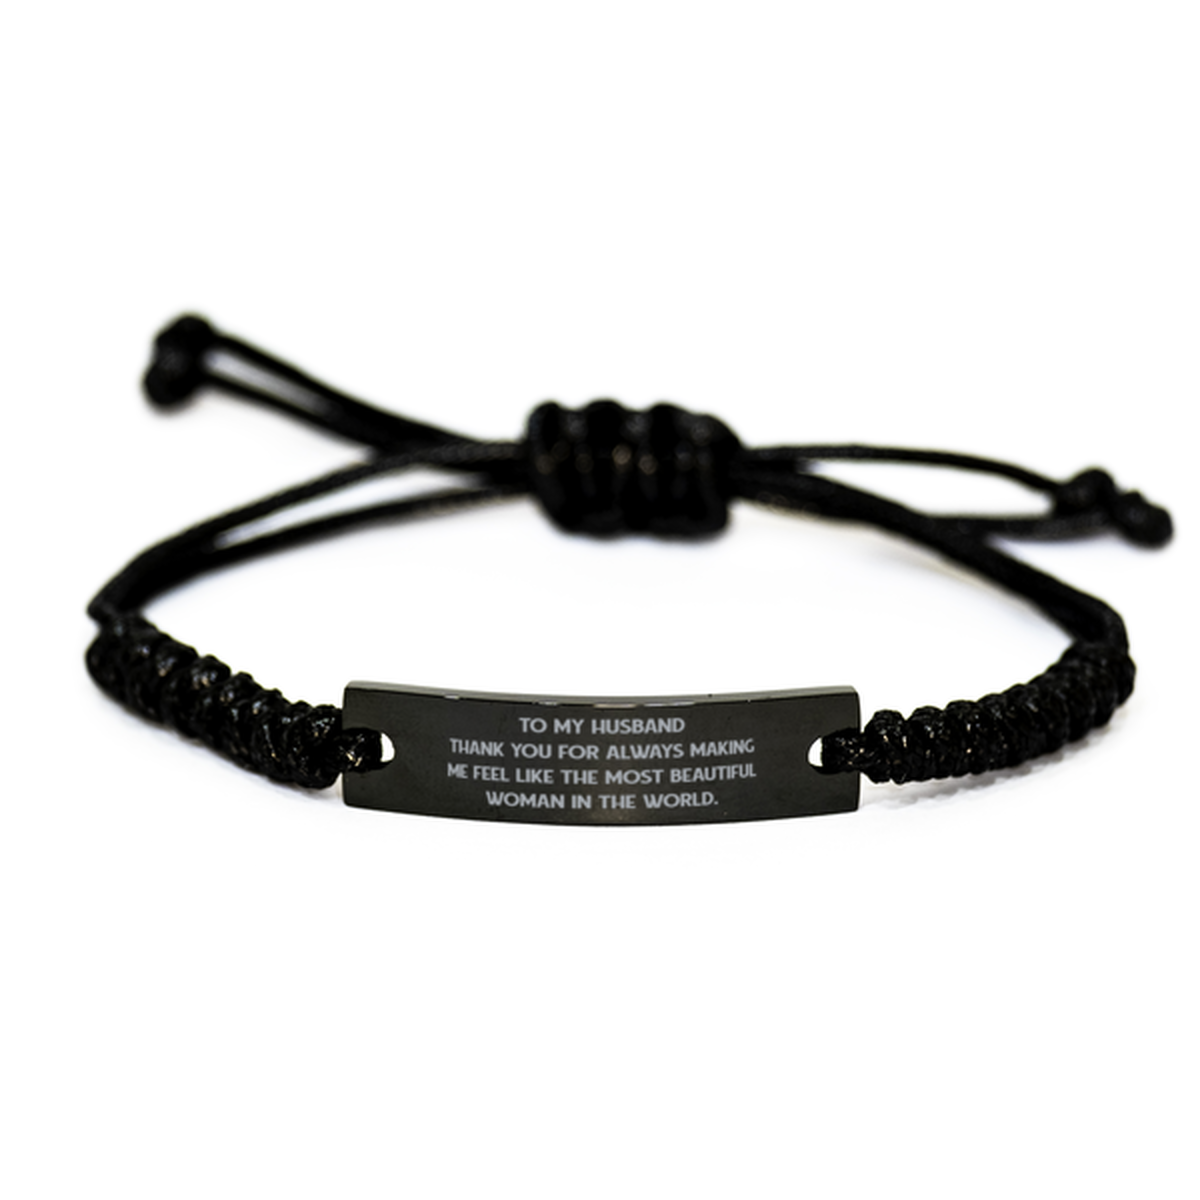 To My Husband Rope Bracelet, Thank You Always, Valentines  Gifts For Husband From Wife, Birthday Gifts For Men